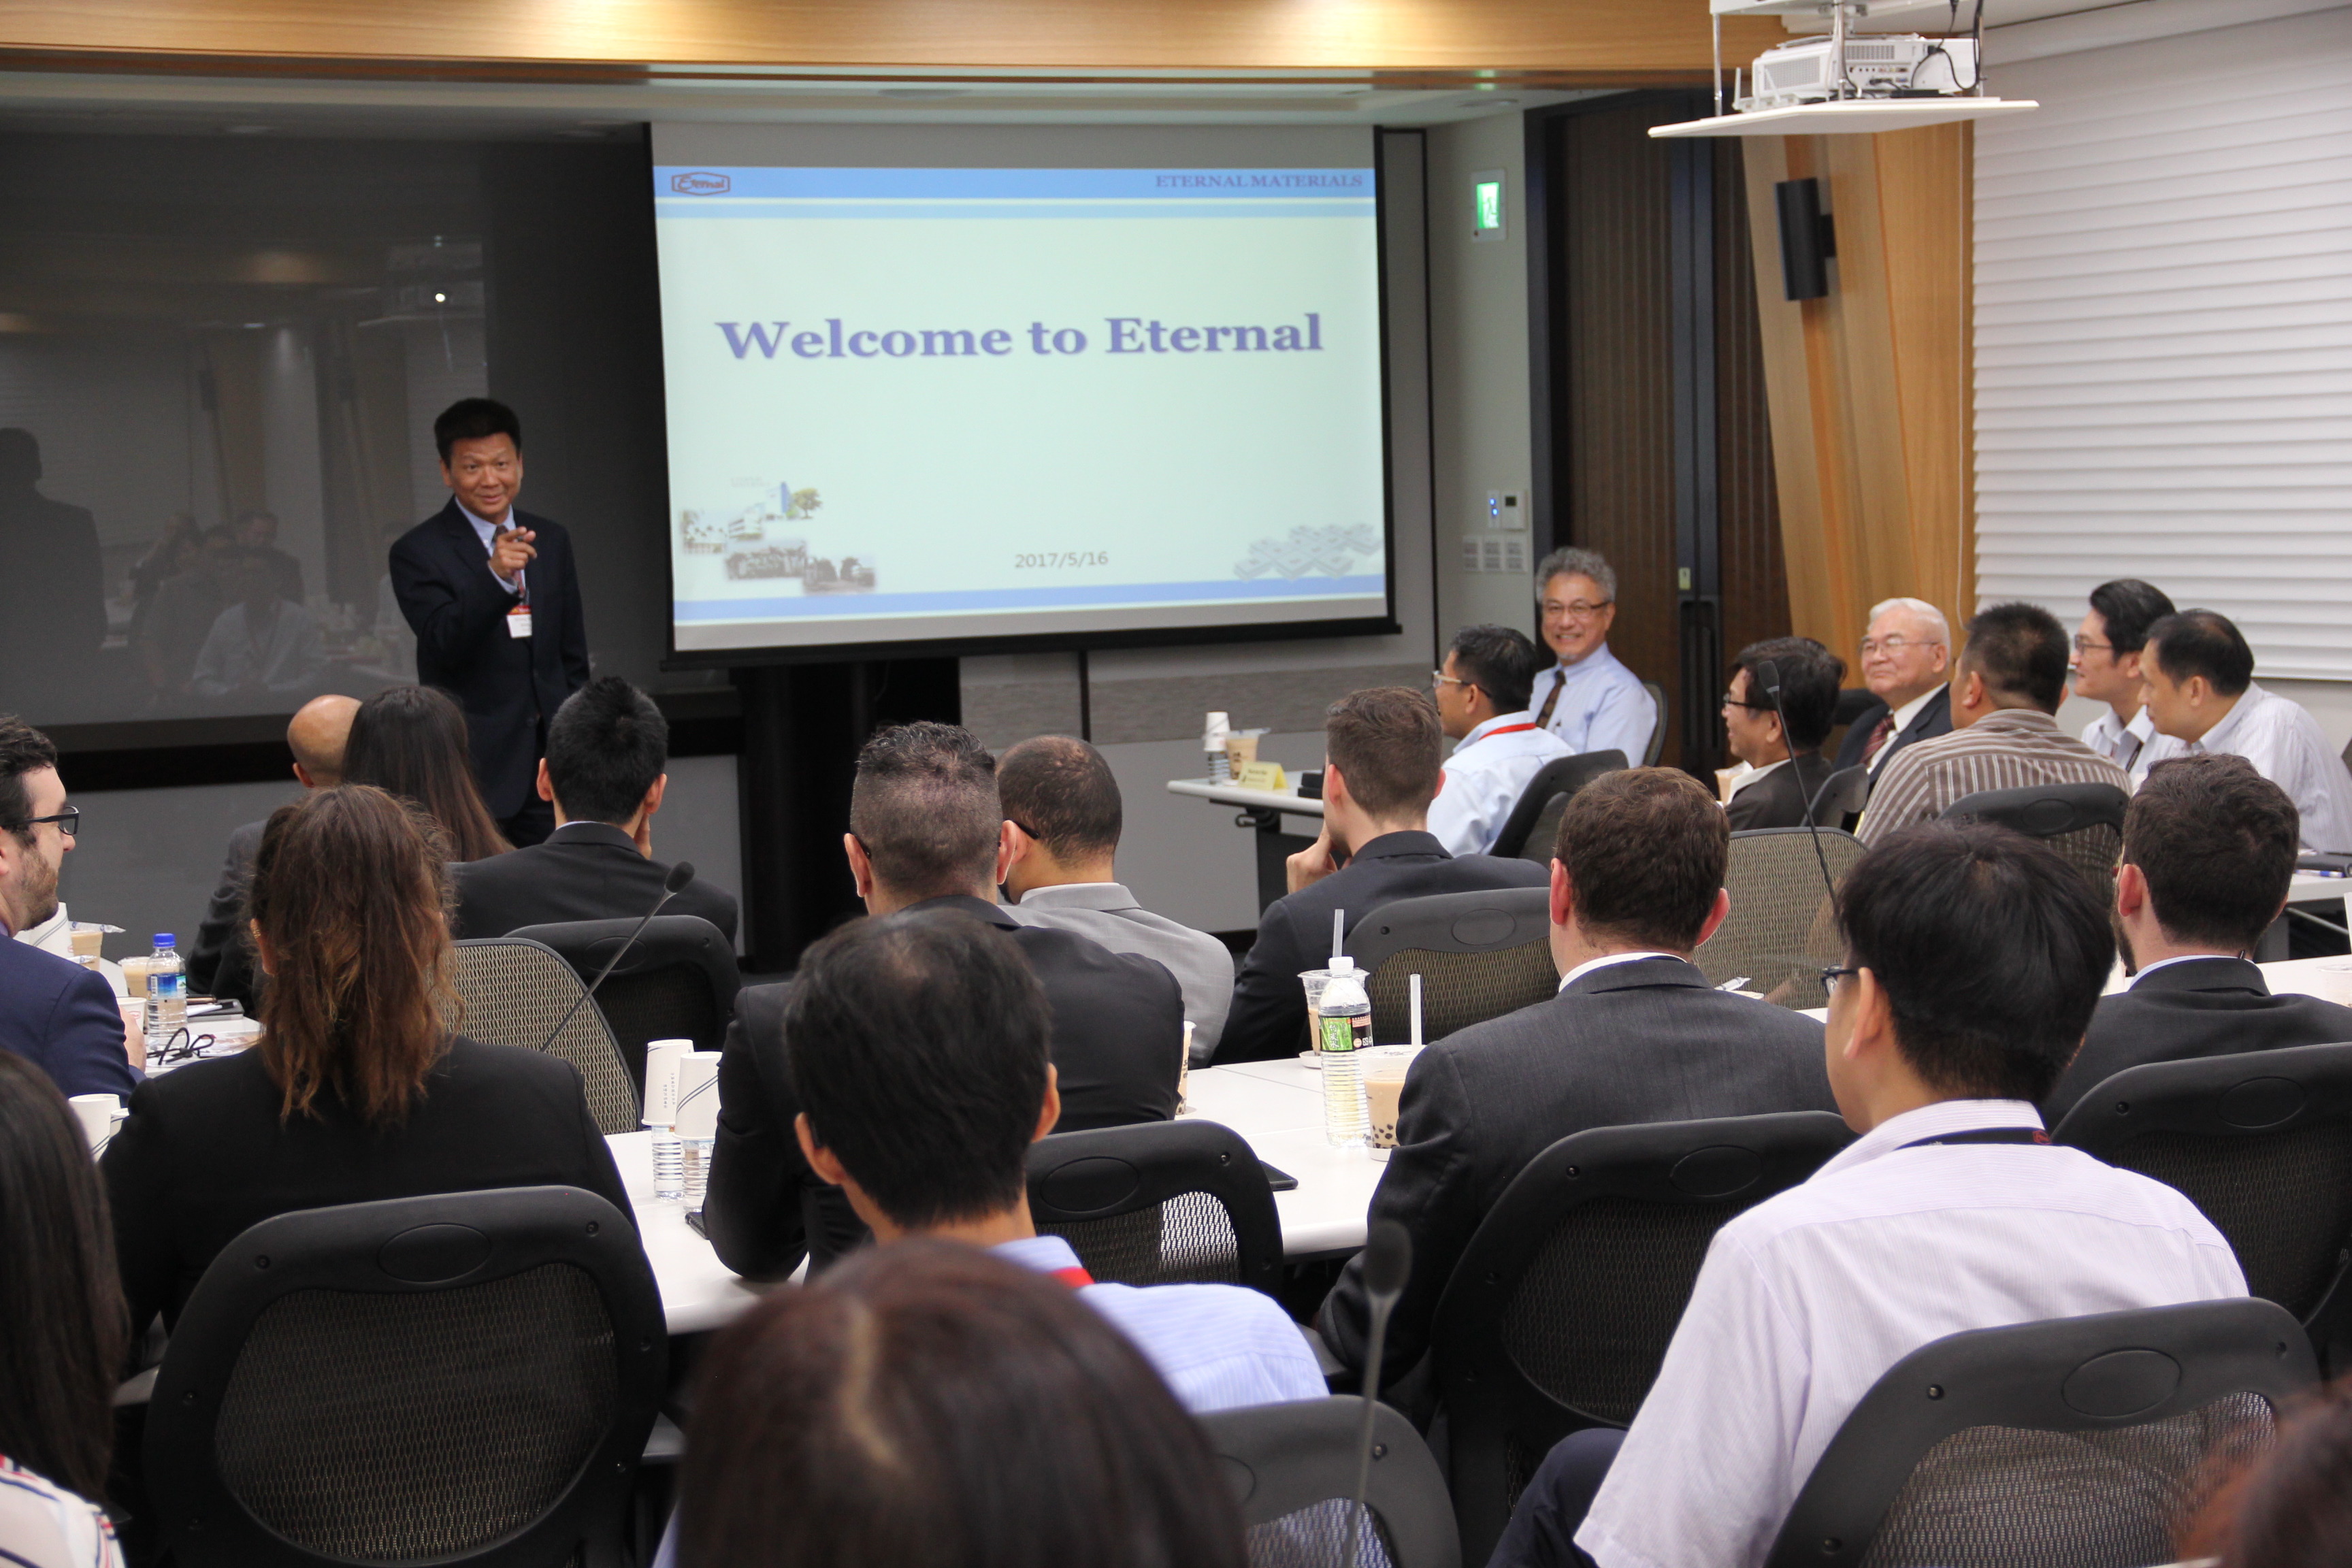 MBA students of Marshall School of Business, University of Southern California visited Eternal